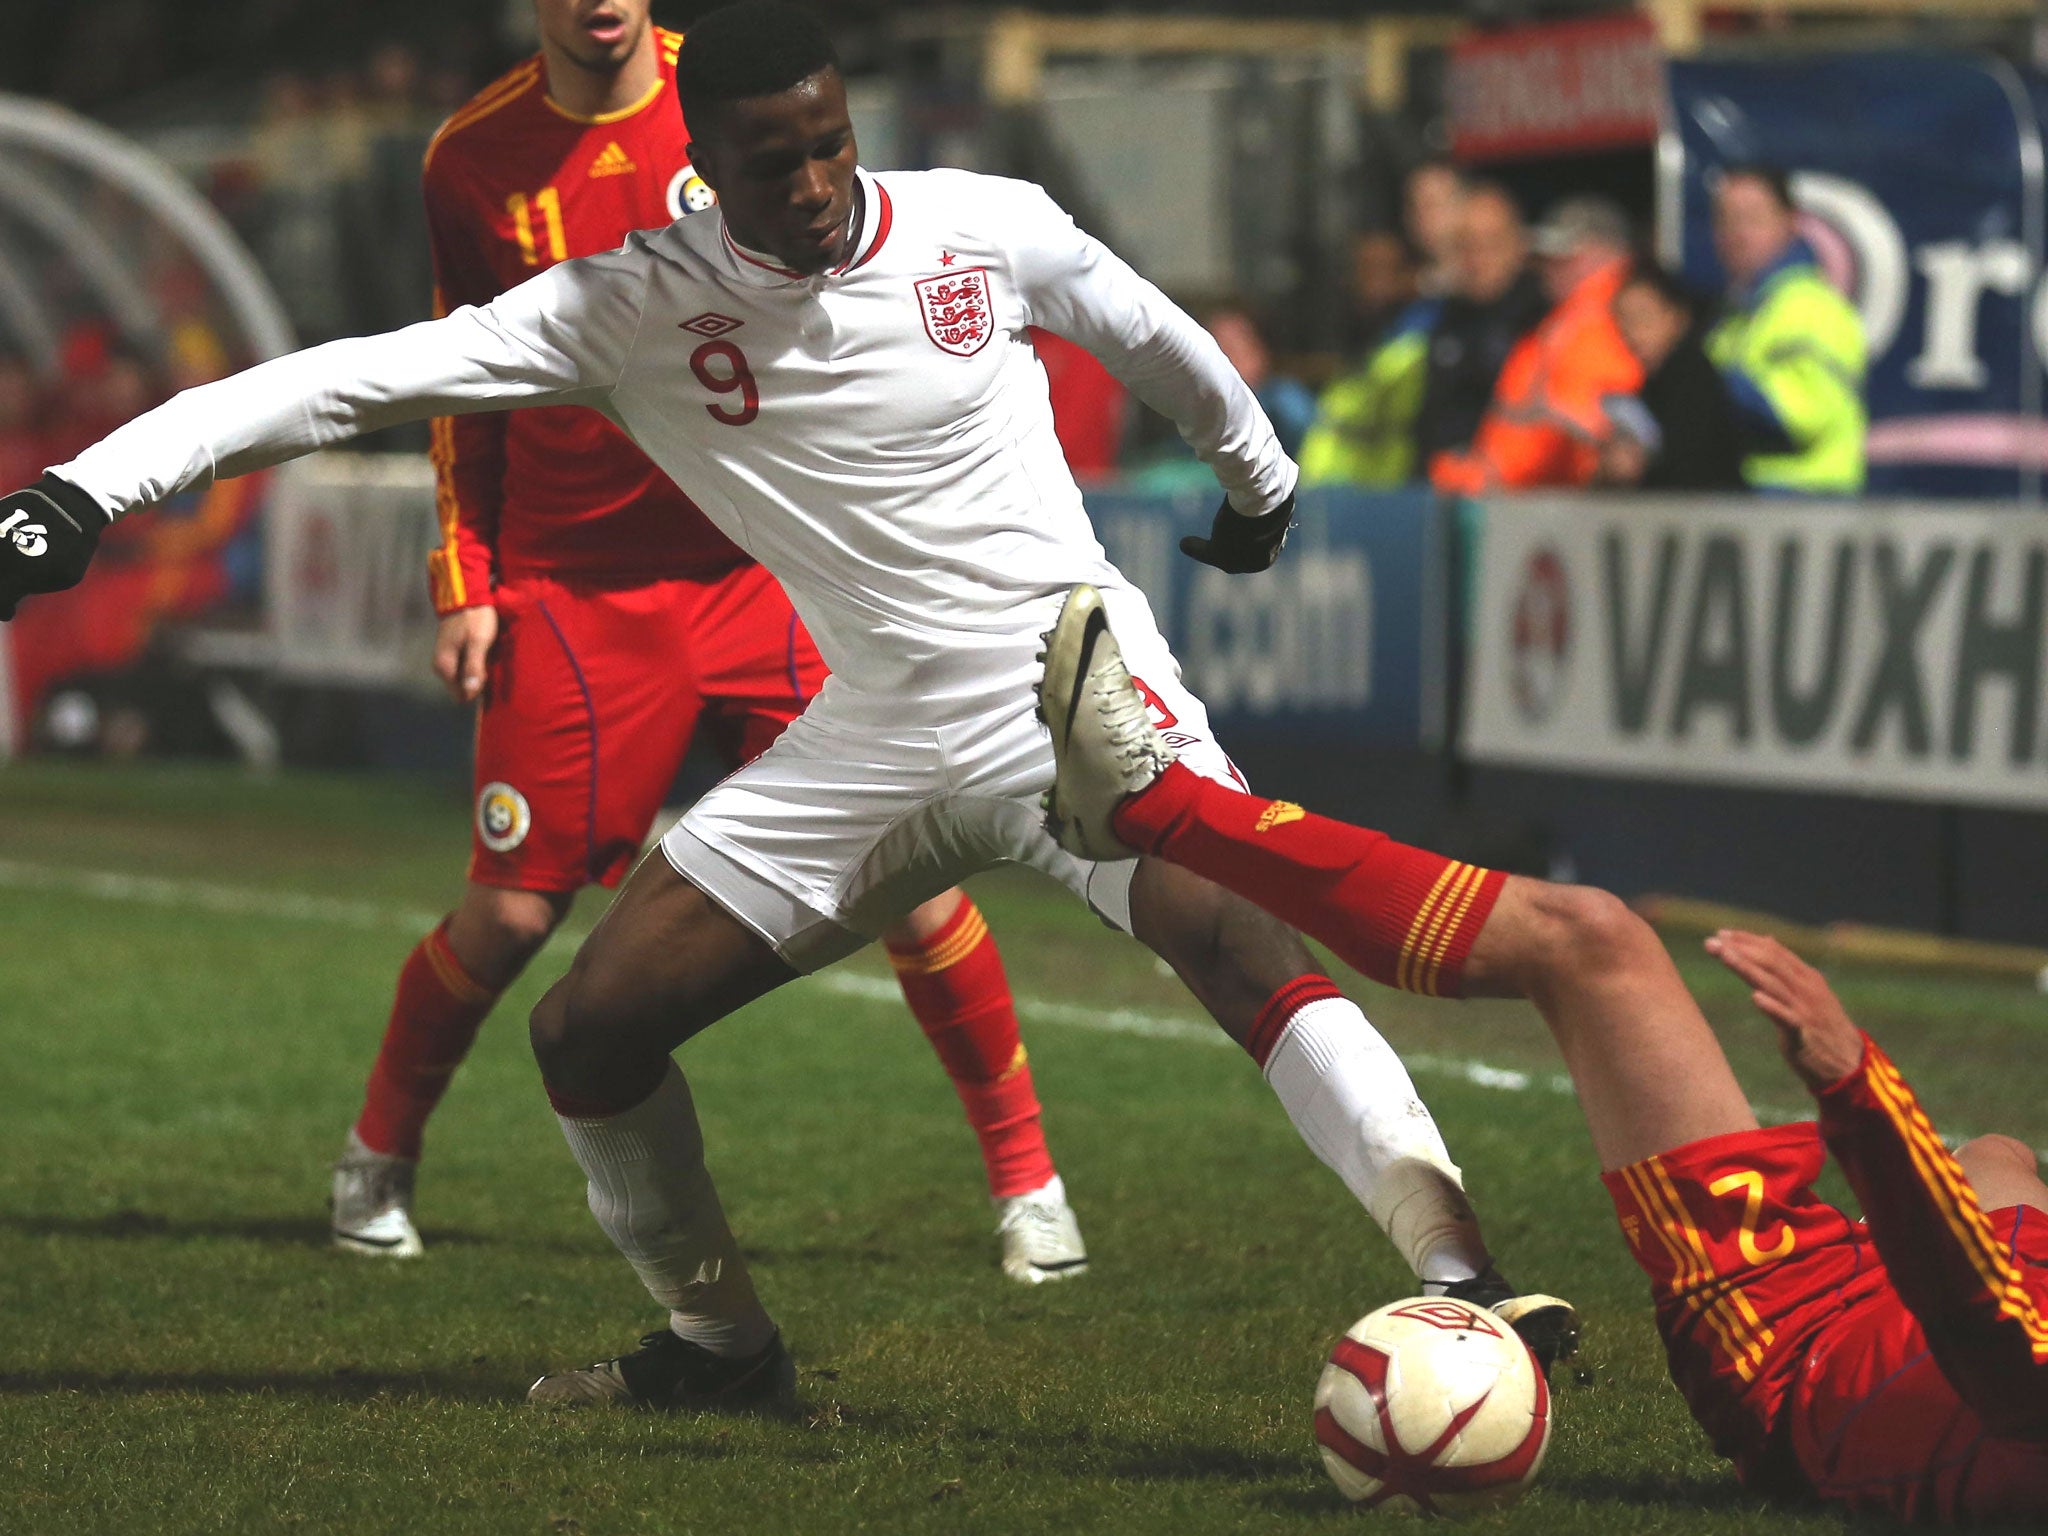 Zaha, who opened the scoring for England, steals the ball